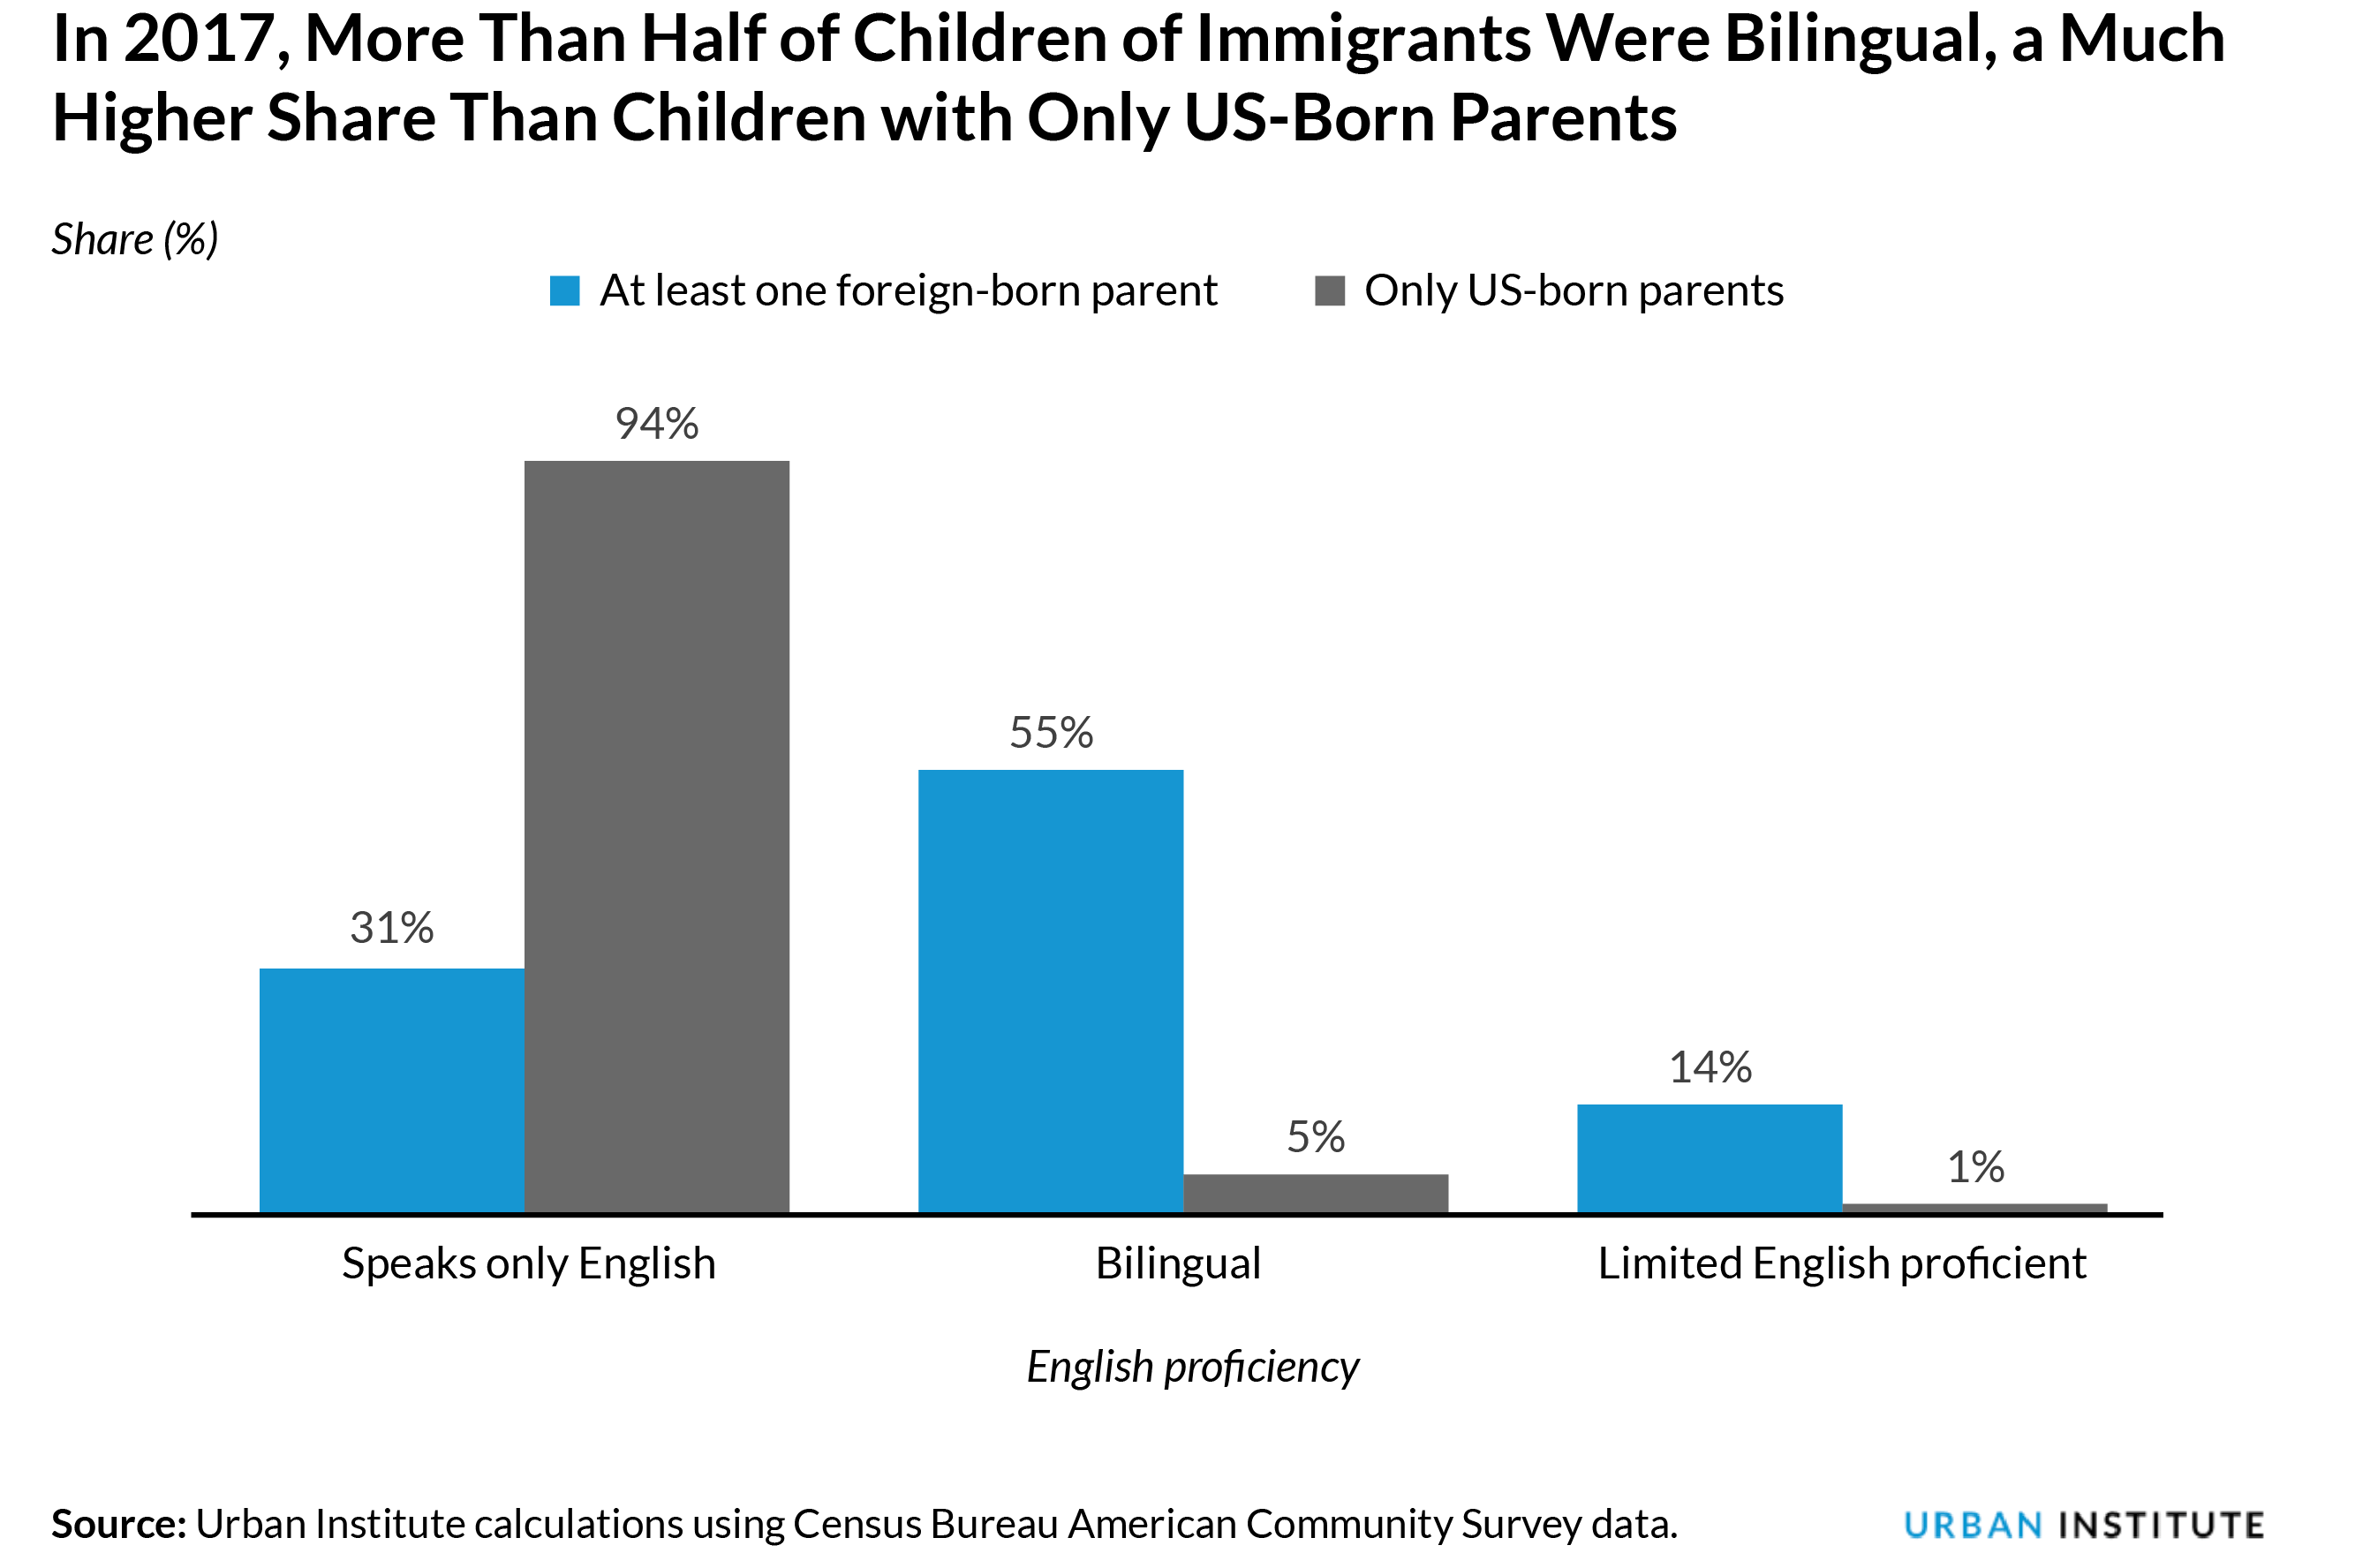 In 2017, More Than Half of Children of Immigrants Were Bilingual, a Much Higher Share Than Children with Only US-Born Parents